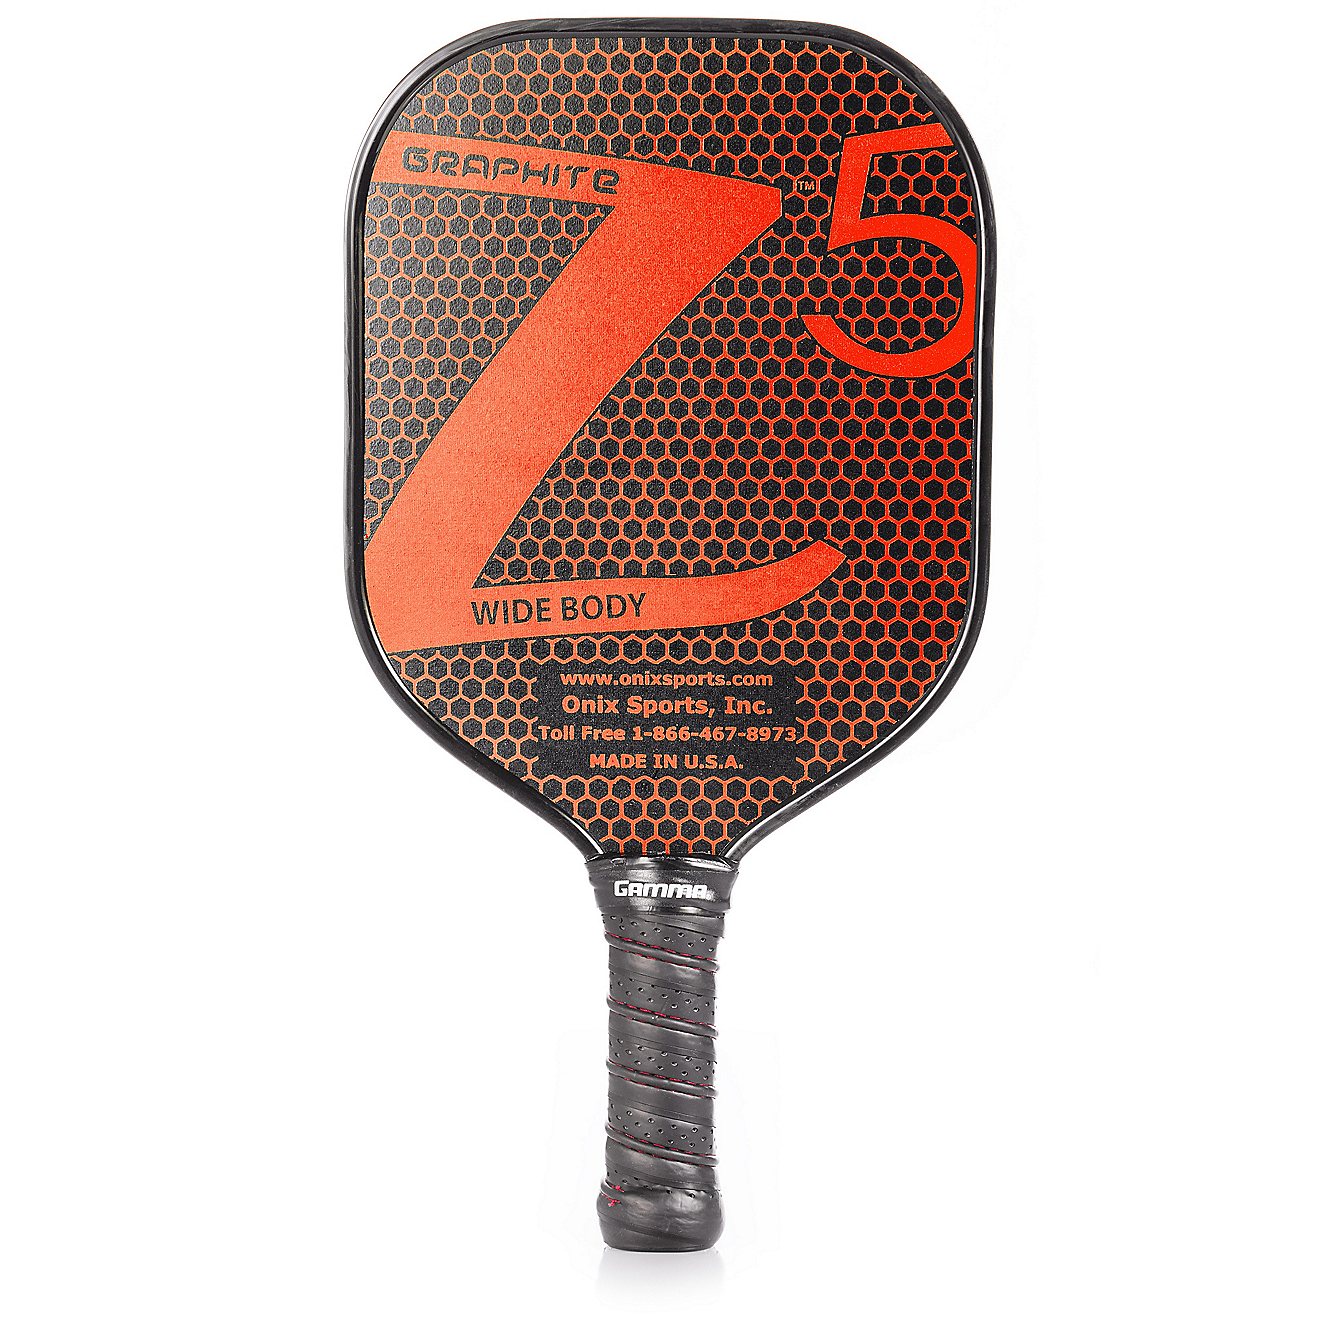 Onix Graphite Z5 Pickleball Paddle                                                                                               - view number 1